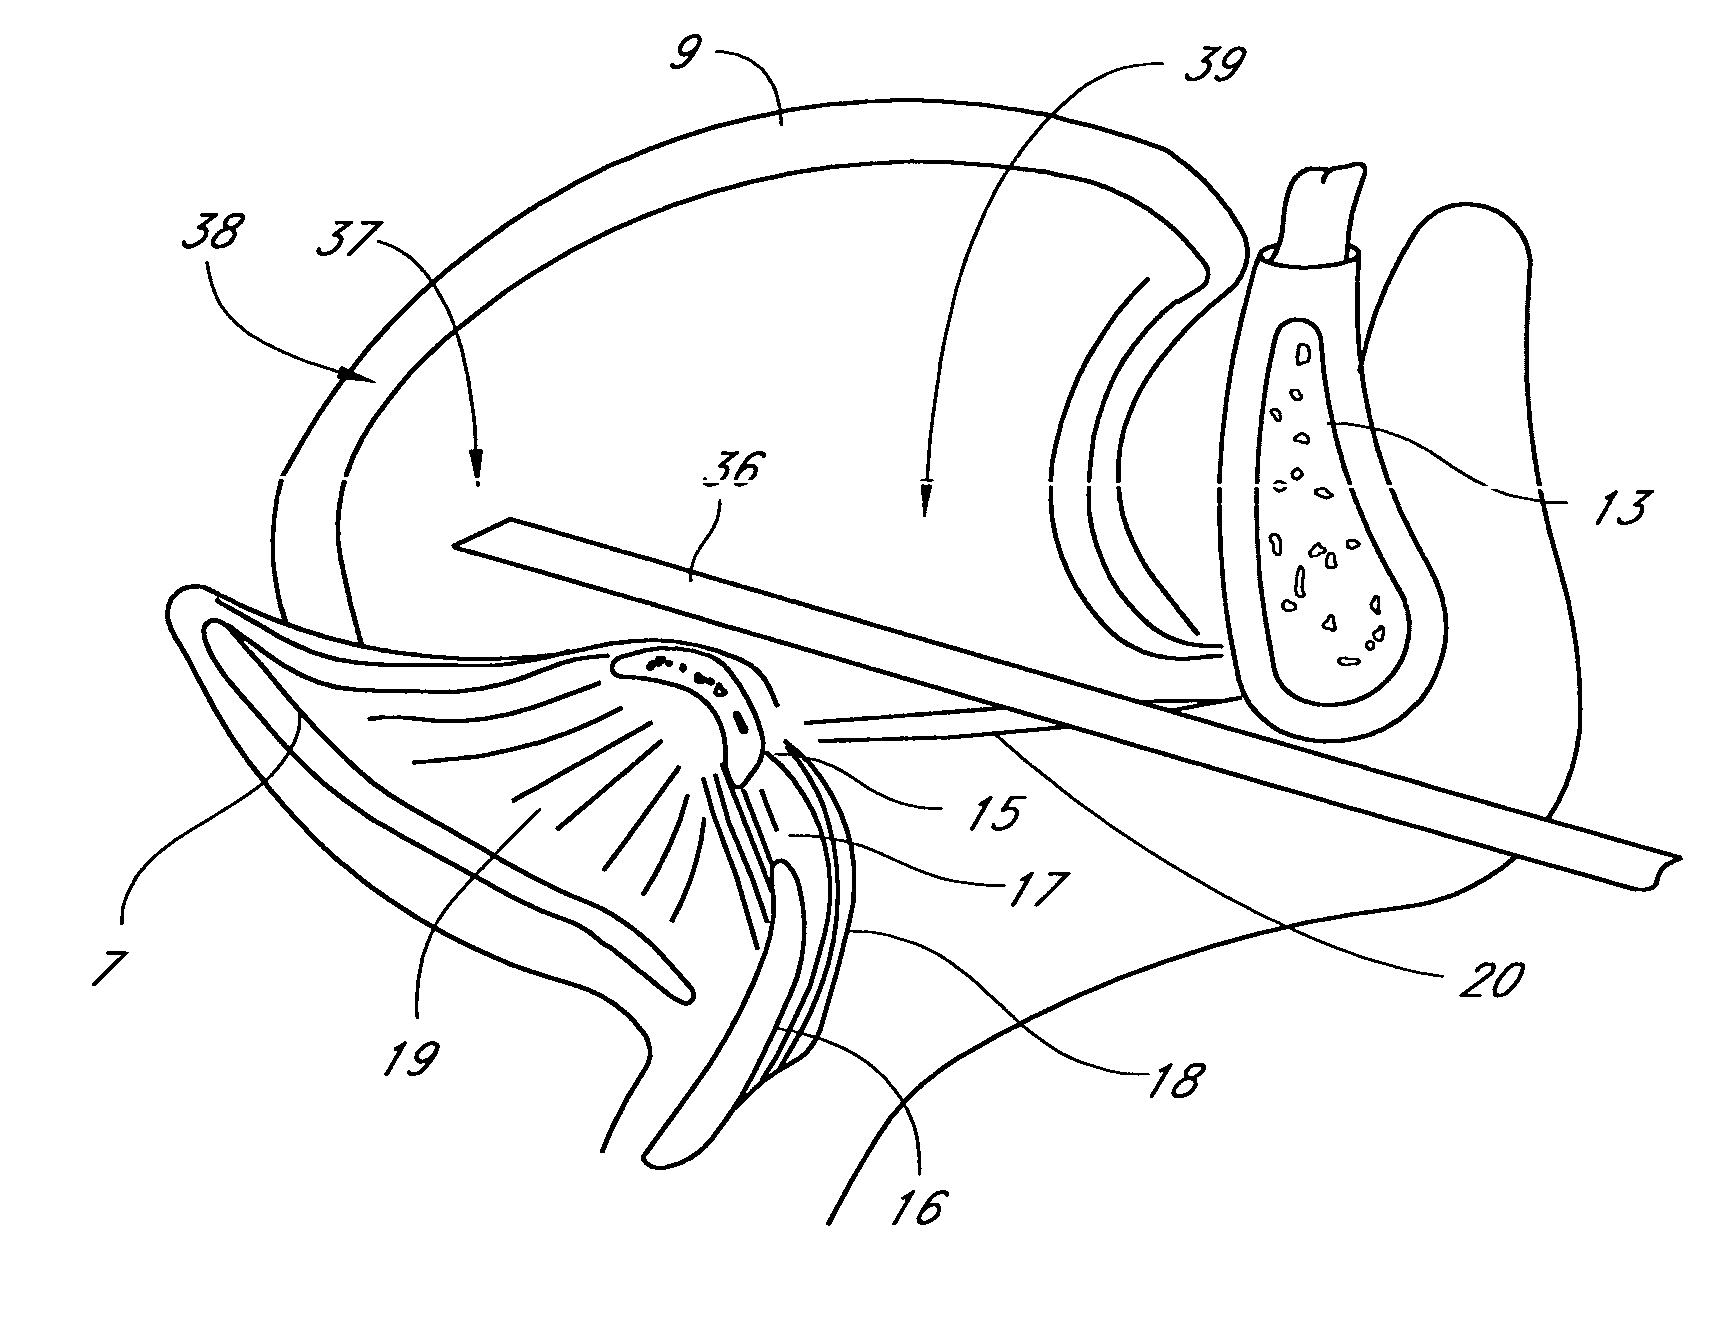 System and method for percutaneous palate remodeling